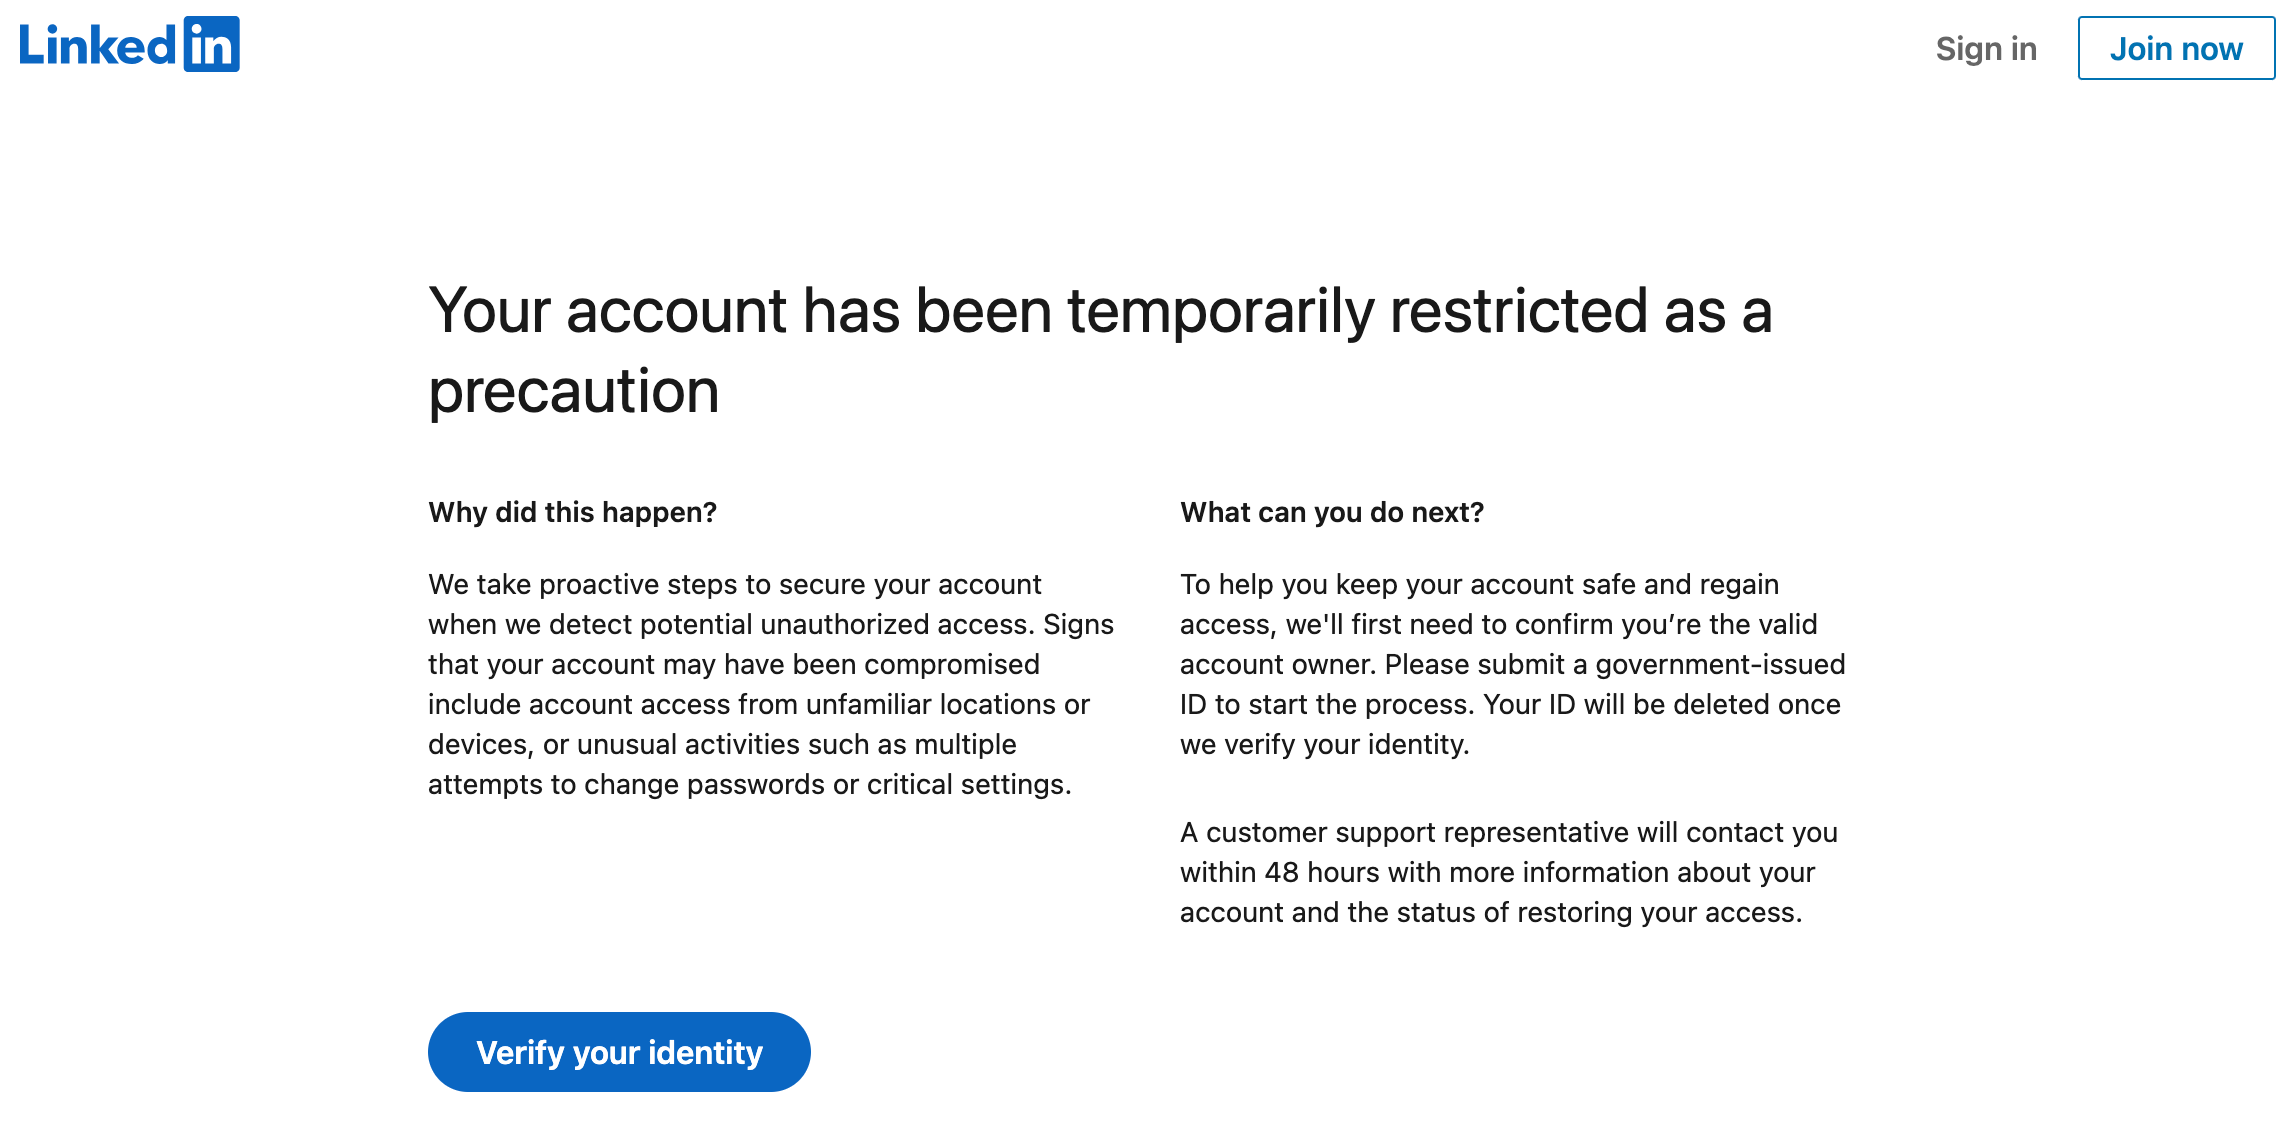 How to get my account back if it has been deleted for unauthorized